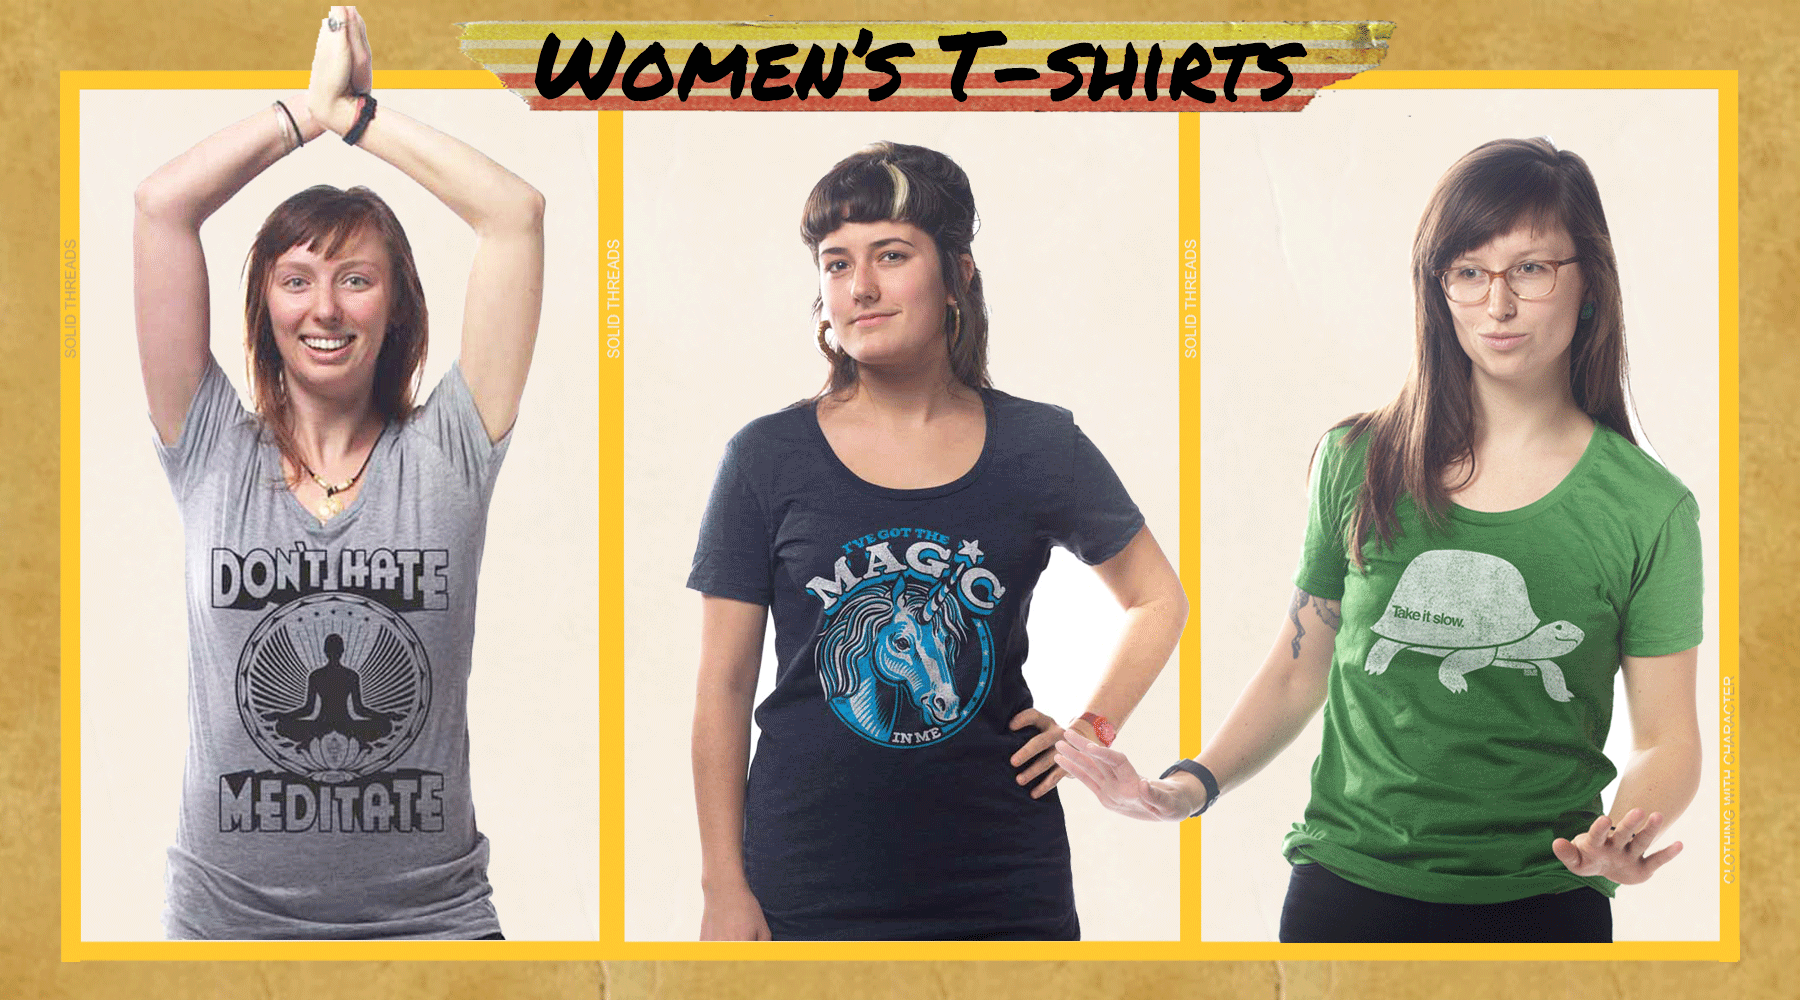 Women's Graphic Tees: The Tee Shop